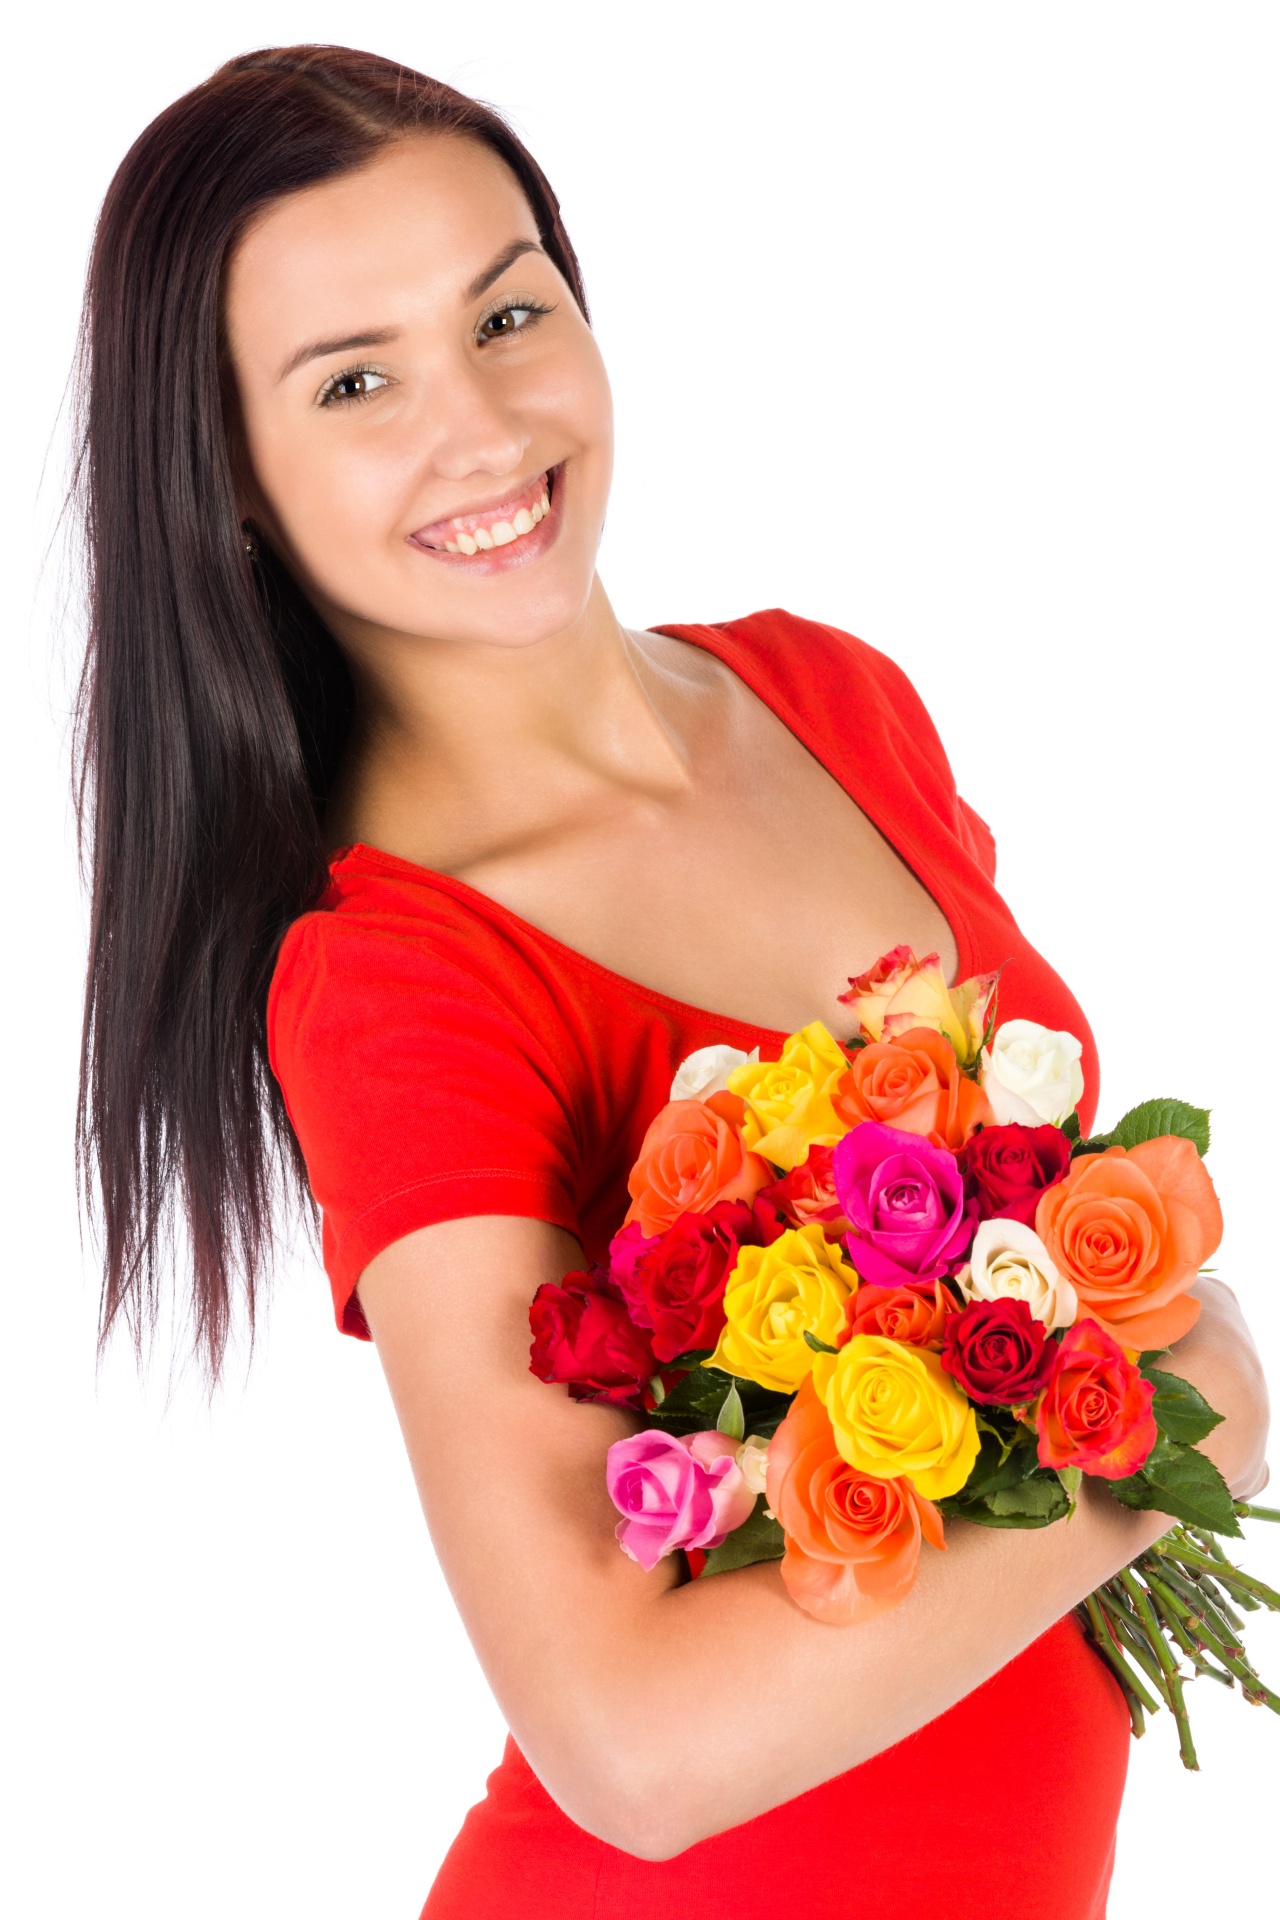 Woman With Bouquet Of Flowers